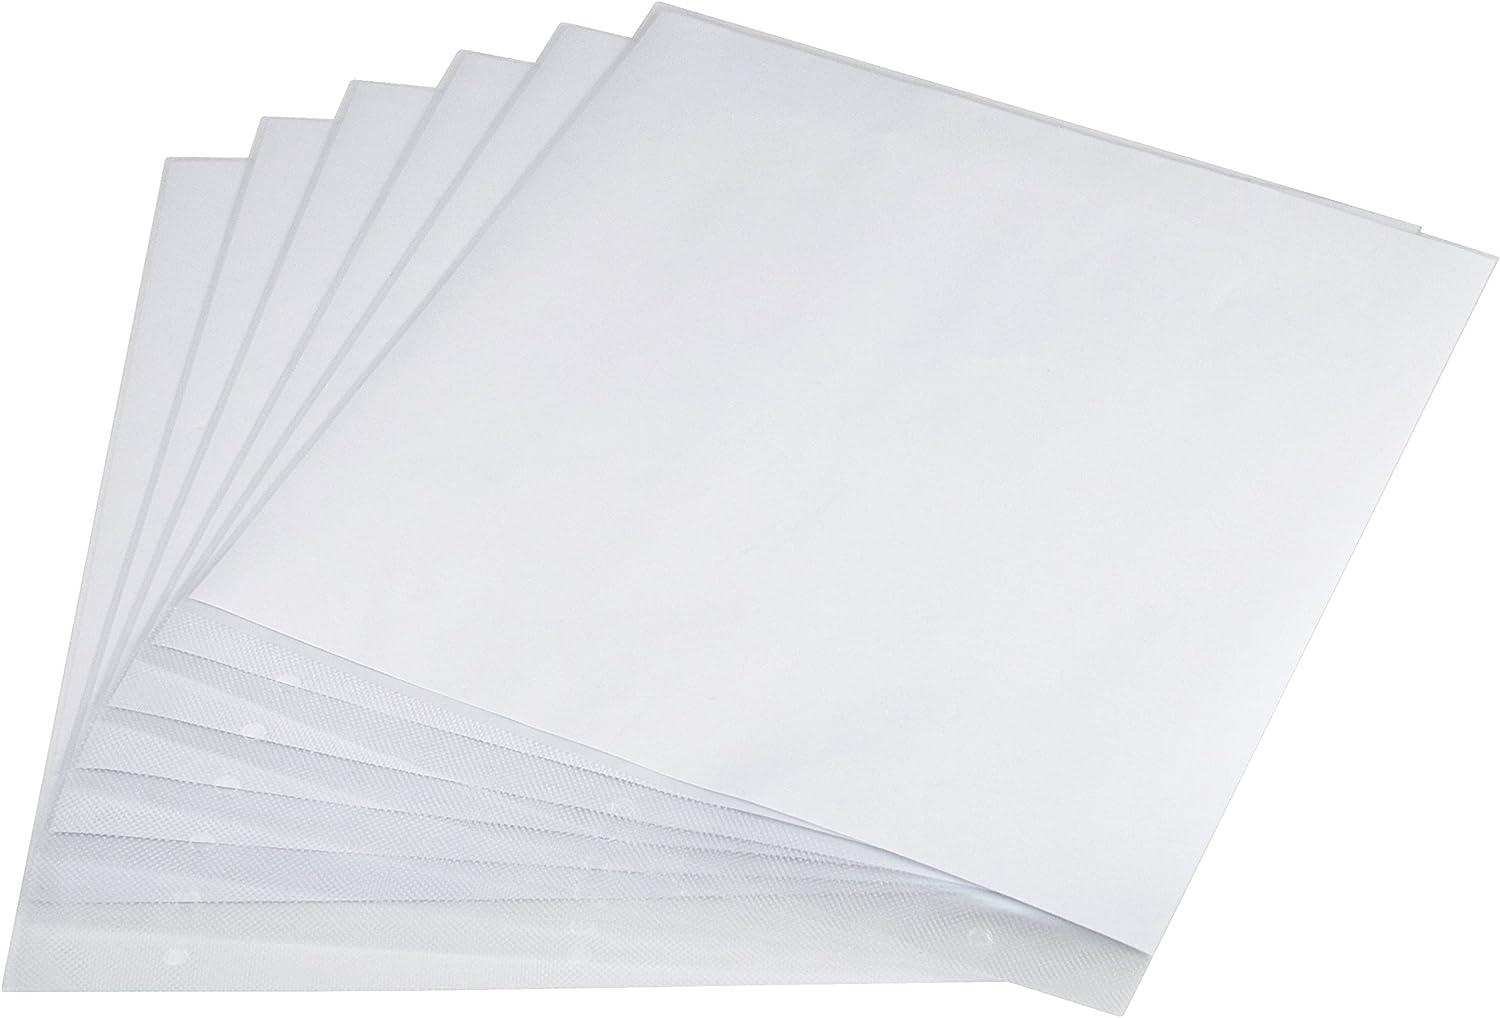 MBI 12x12 White Scrapbook Refill Pages (6 Pack)